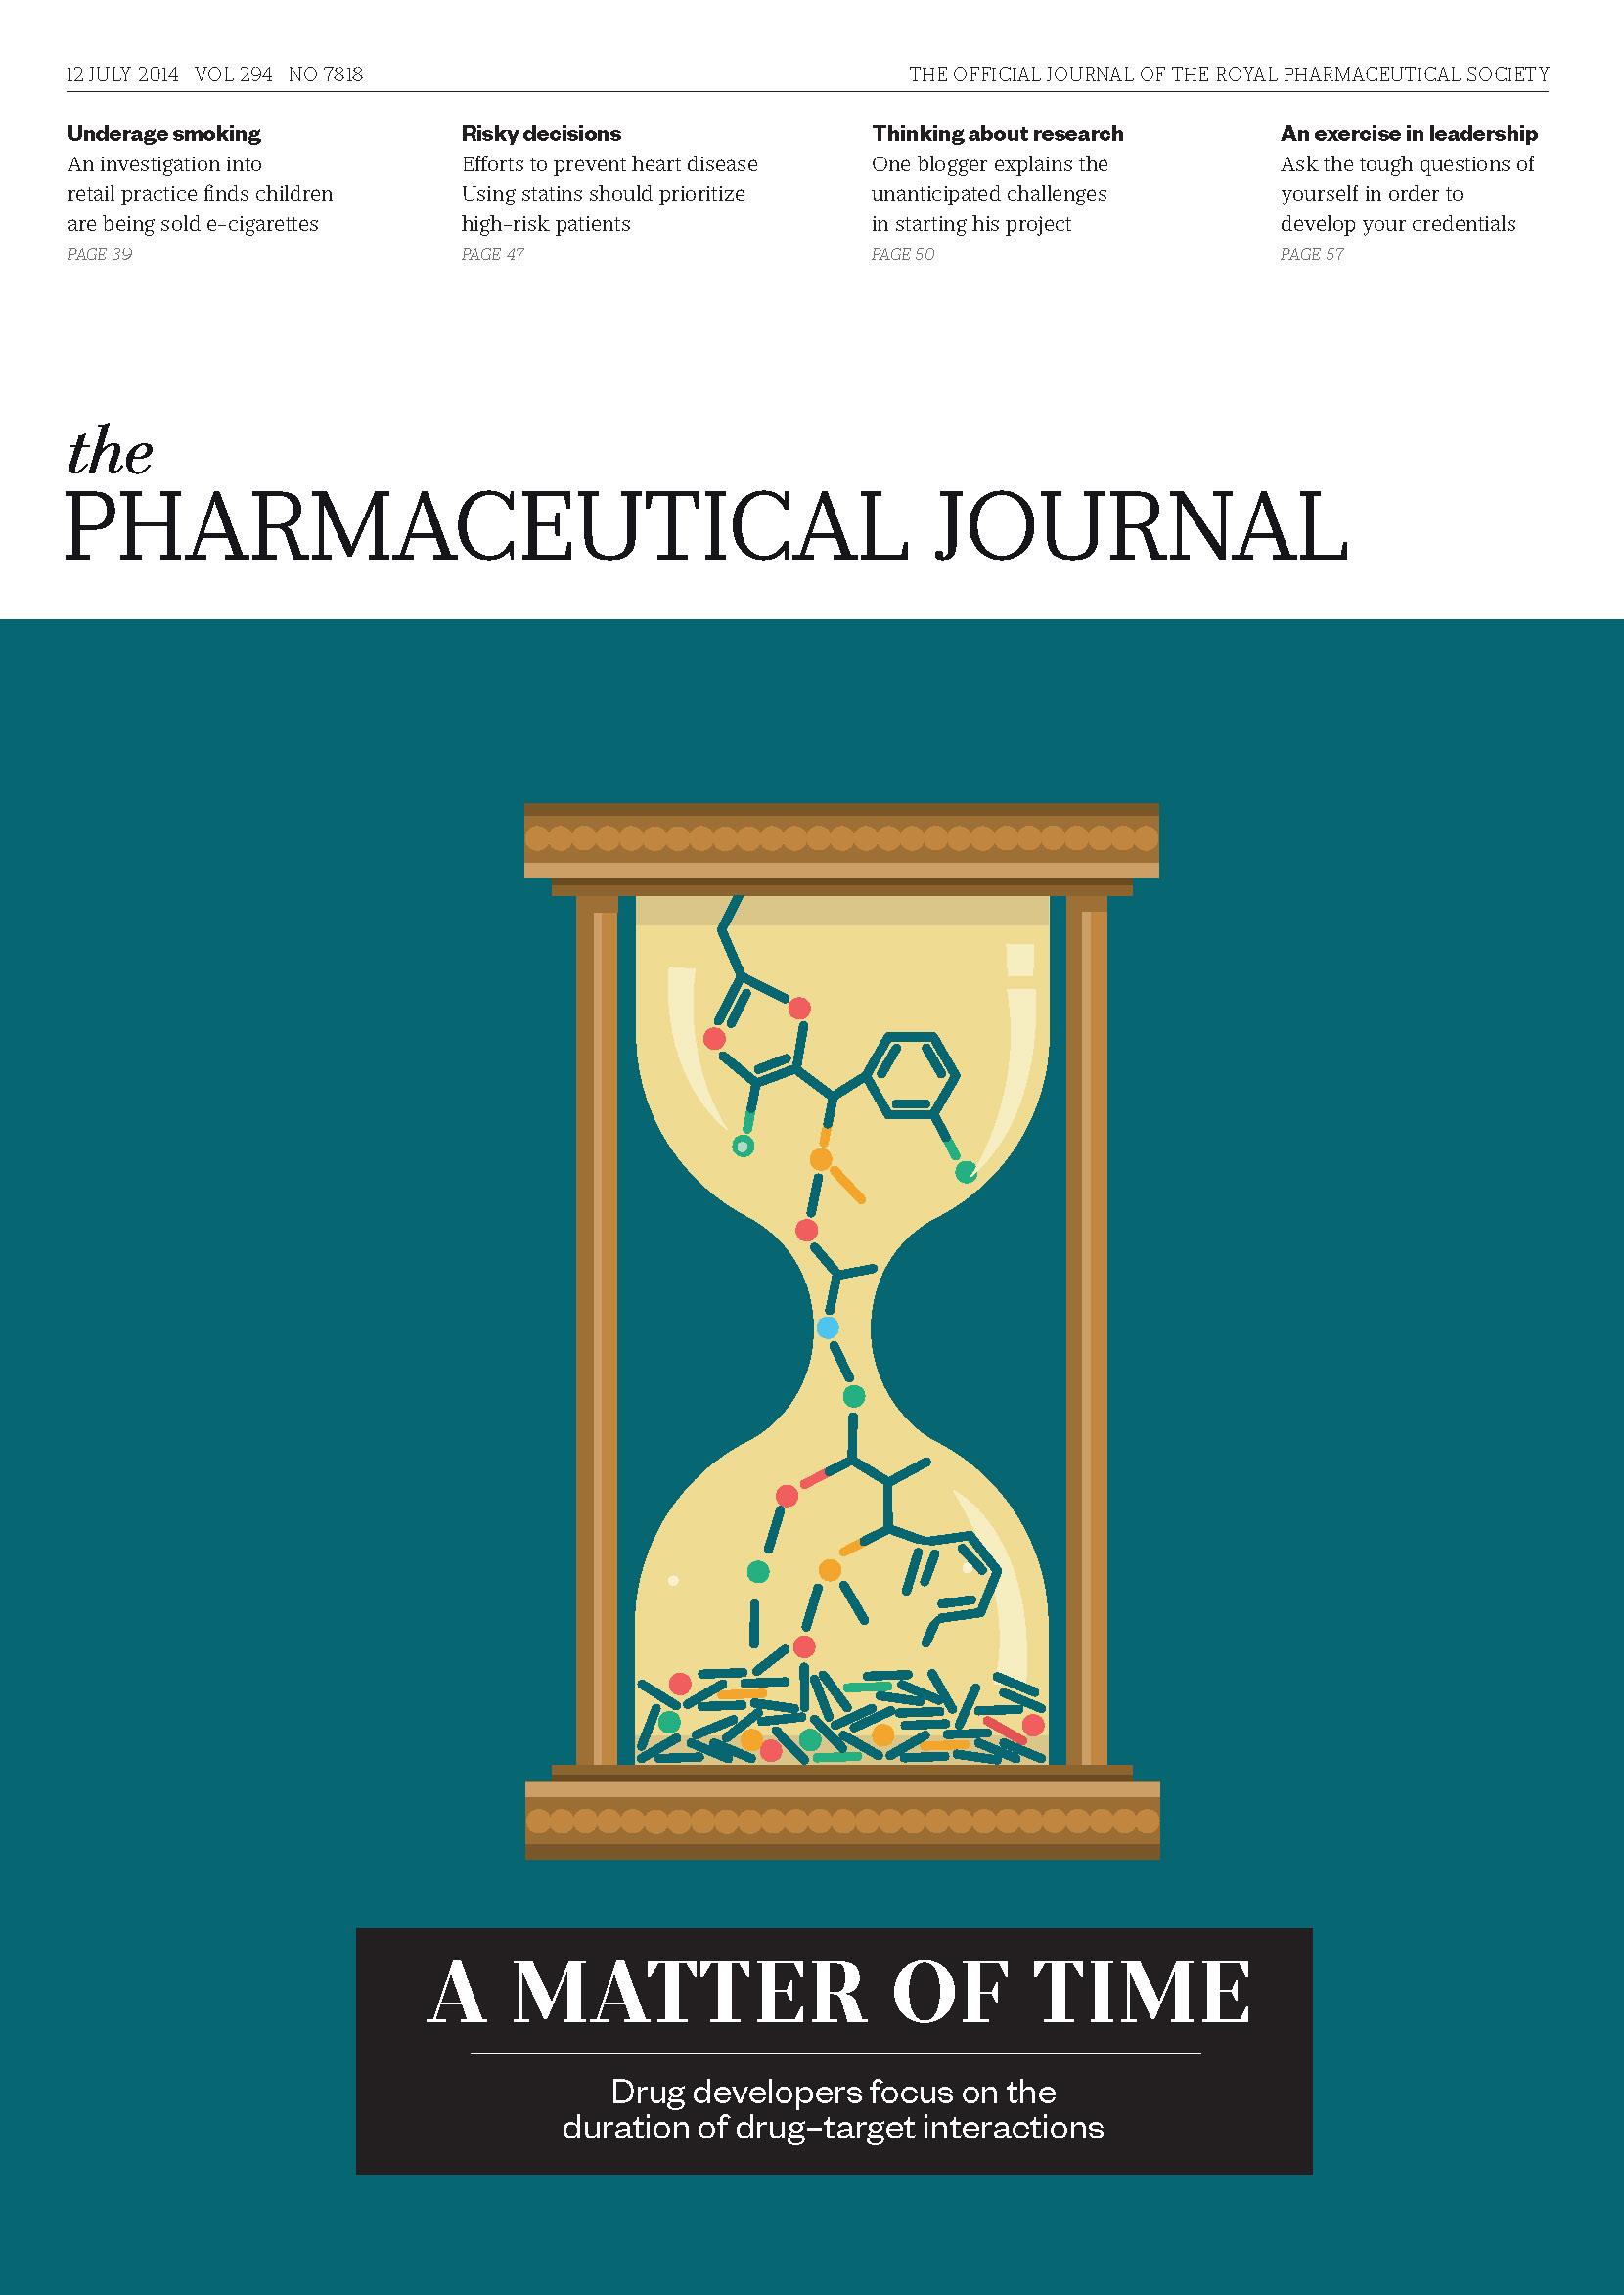 Publication issue cover for PJ, 12 July 2014, Vol 293, No 7818